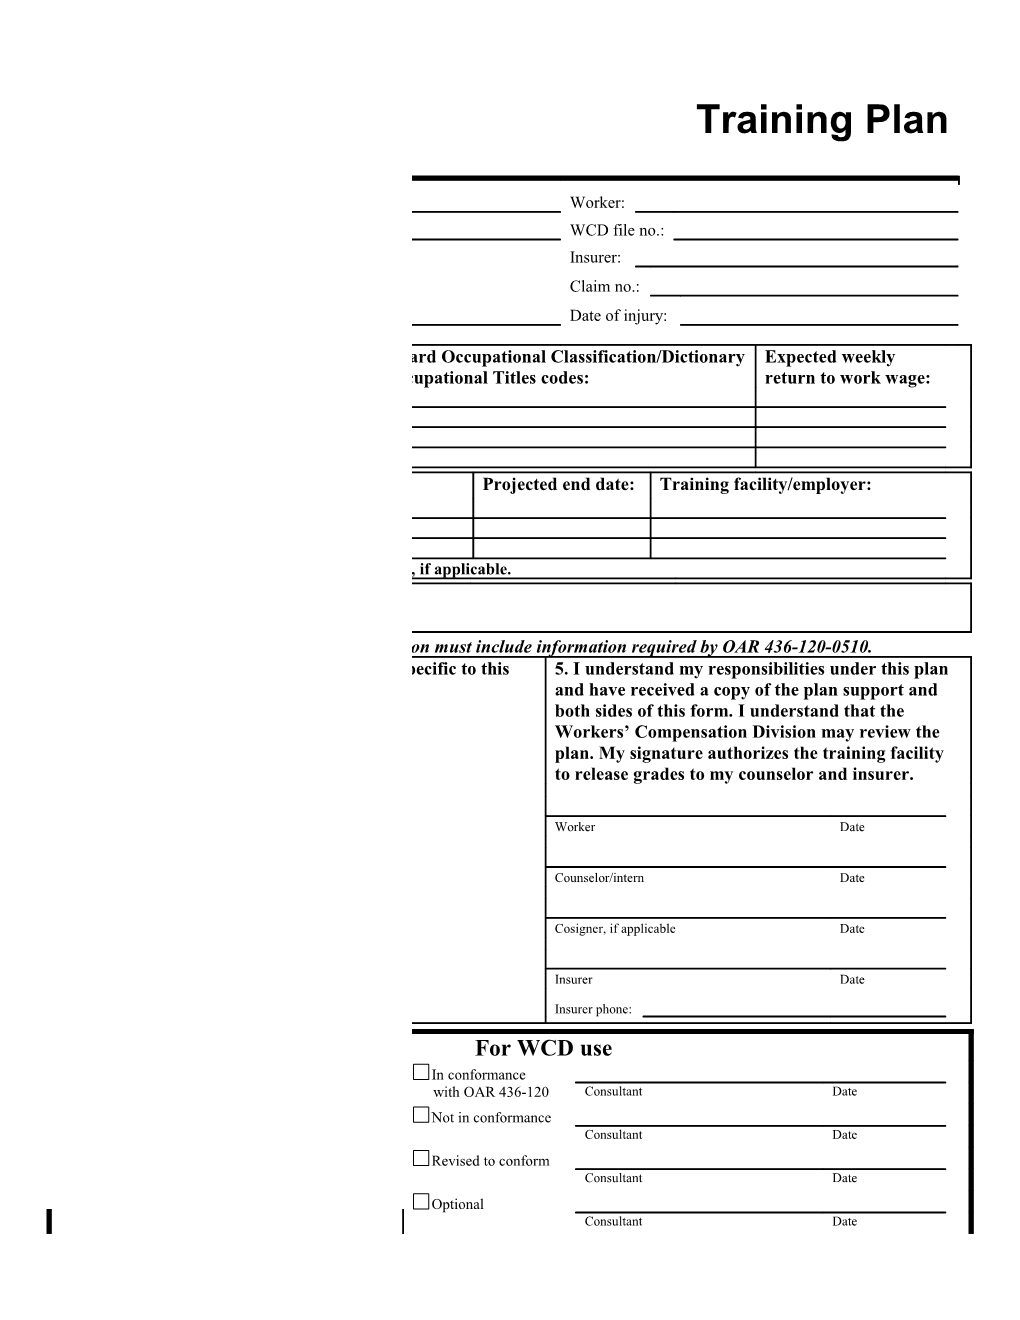 Submit To: Department of Consumer & Business Services Workers Compensation Division 350